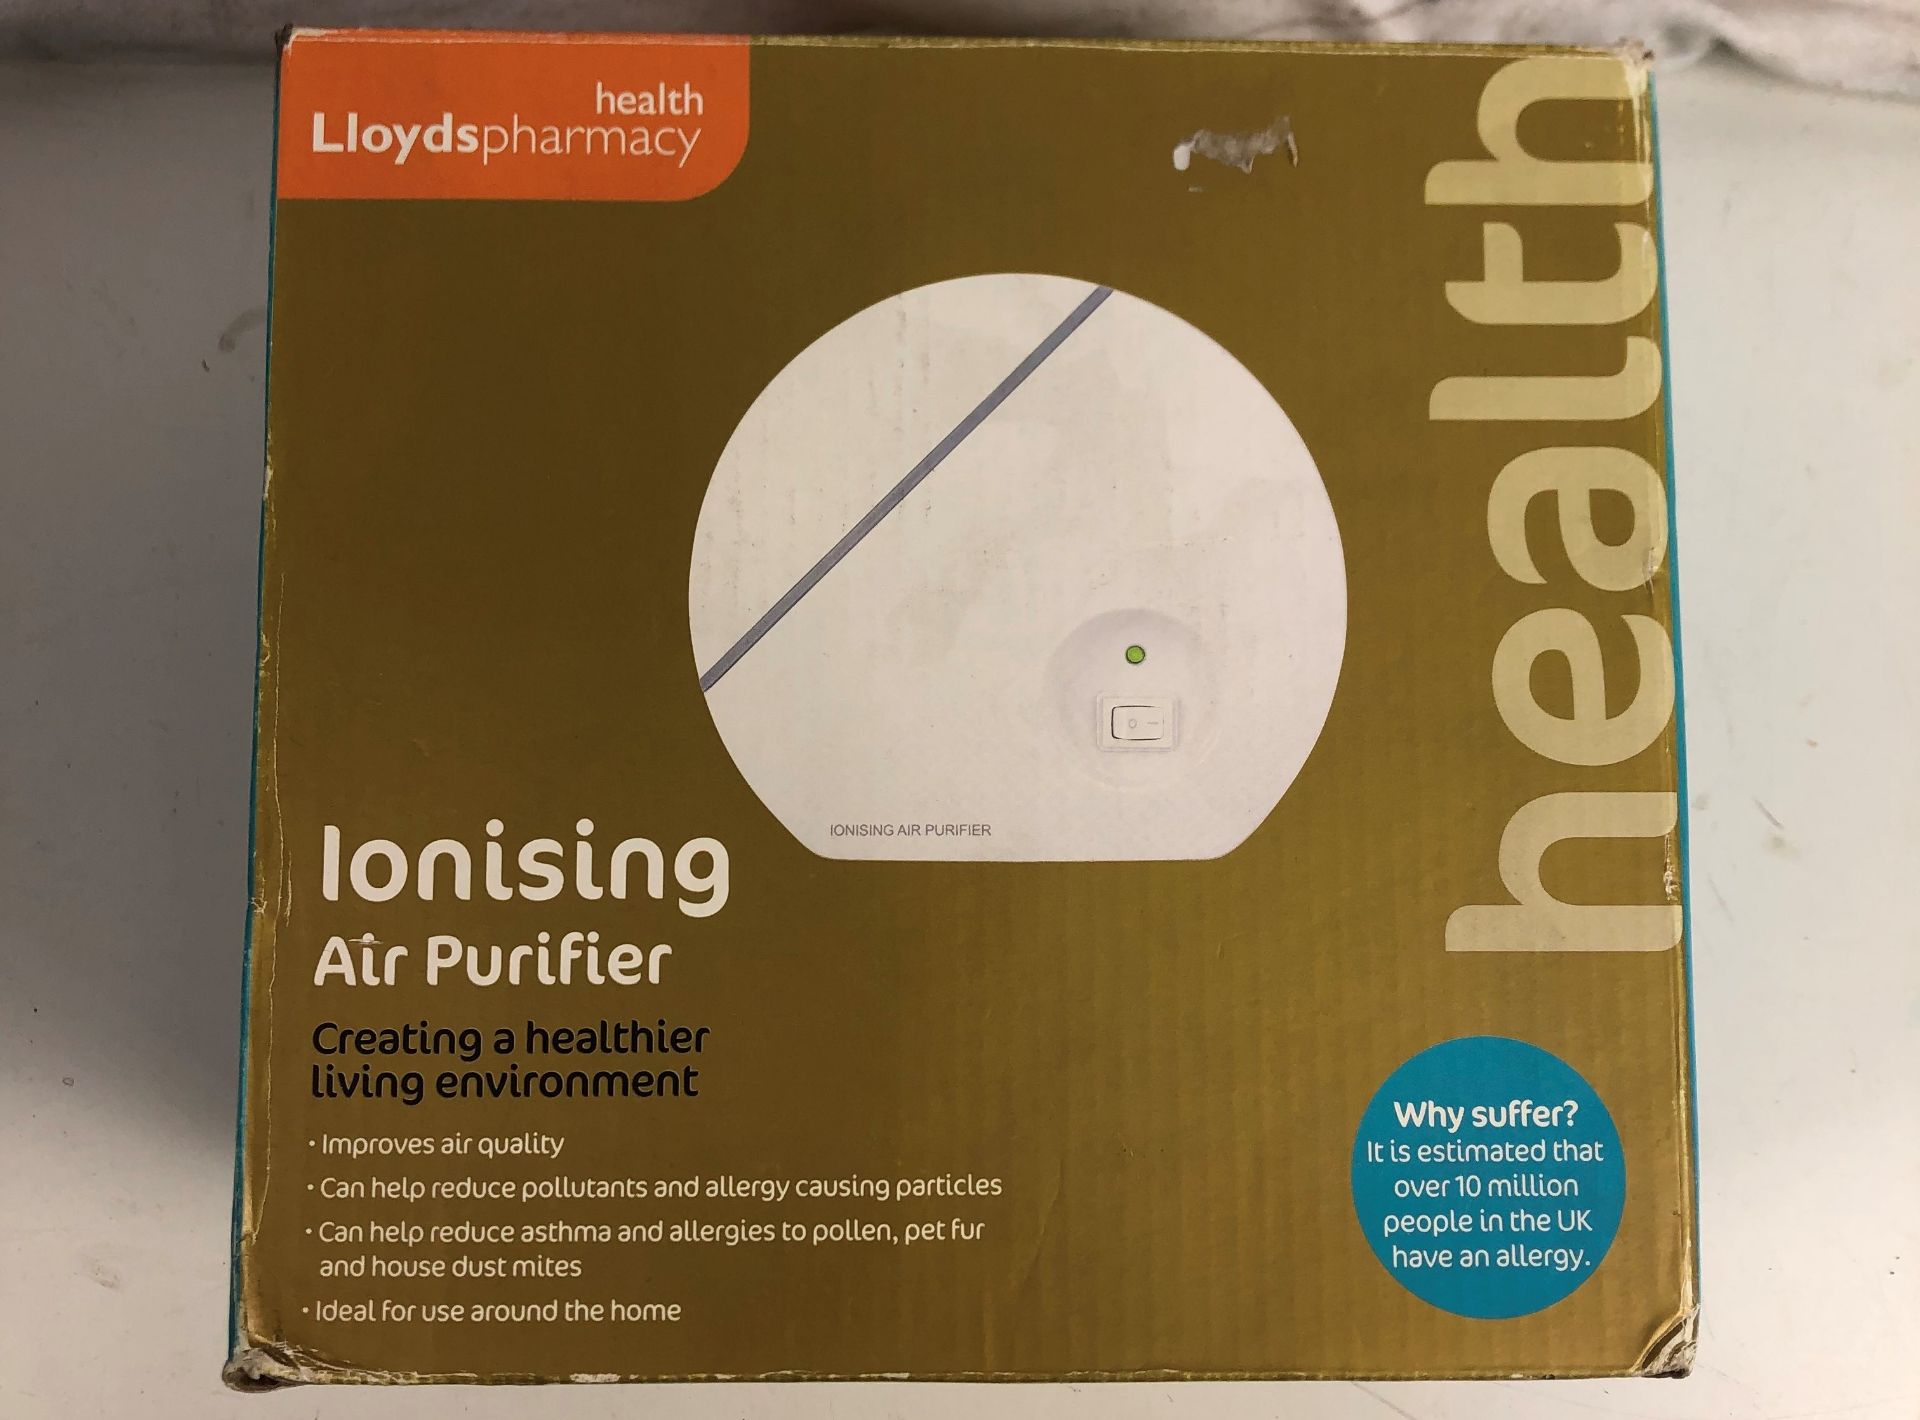 Lloyds Pharmacy Ionising Air Purifier - Image 2 of 2